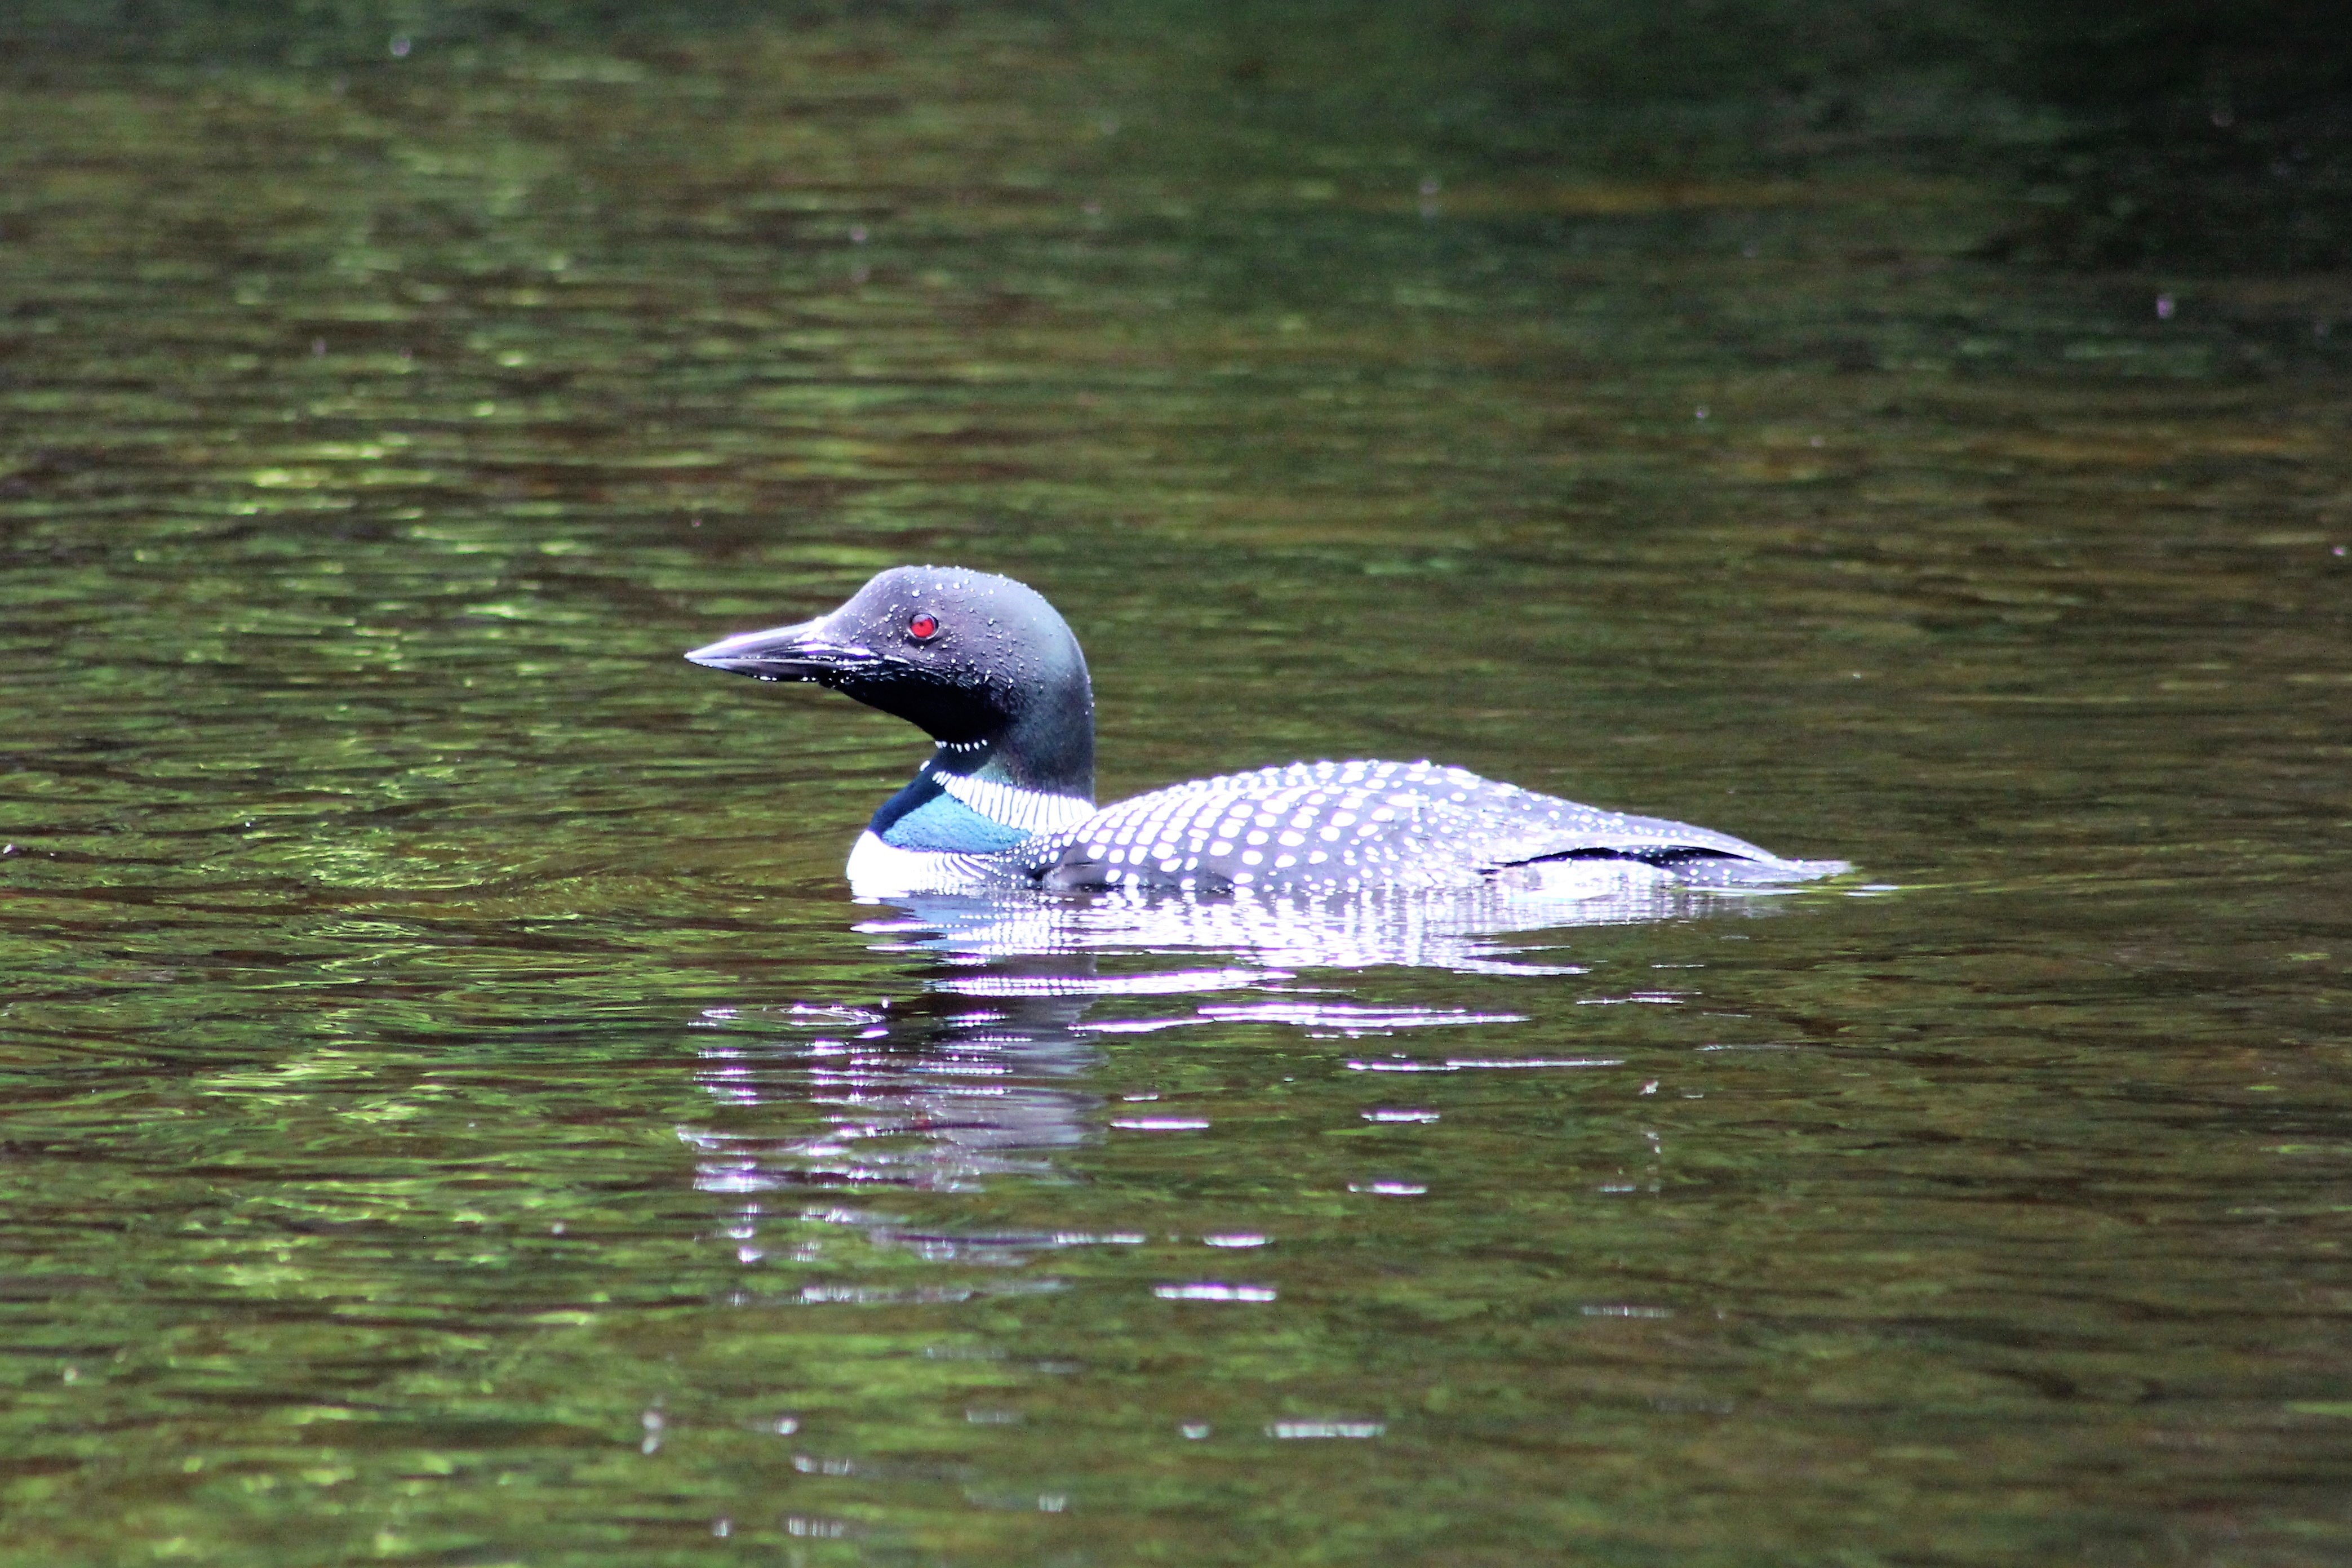 The Loon That Was Fishing With Us